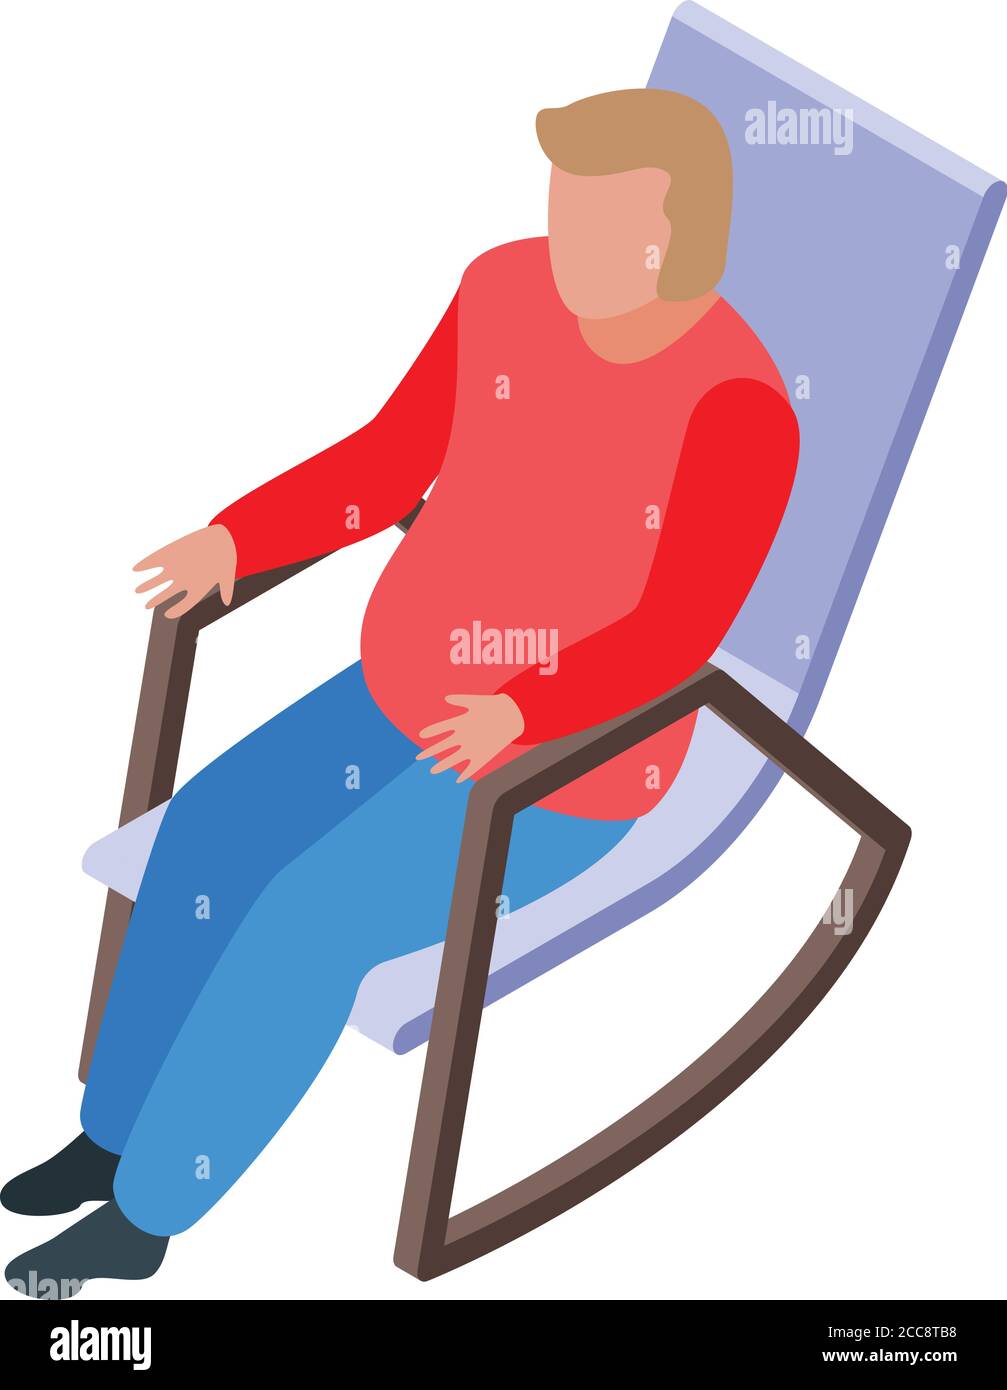 Man retirement rocking chair icon, isometric style Stock Vector